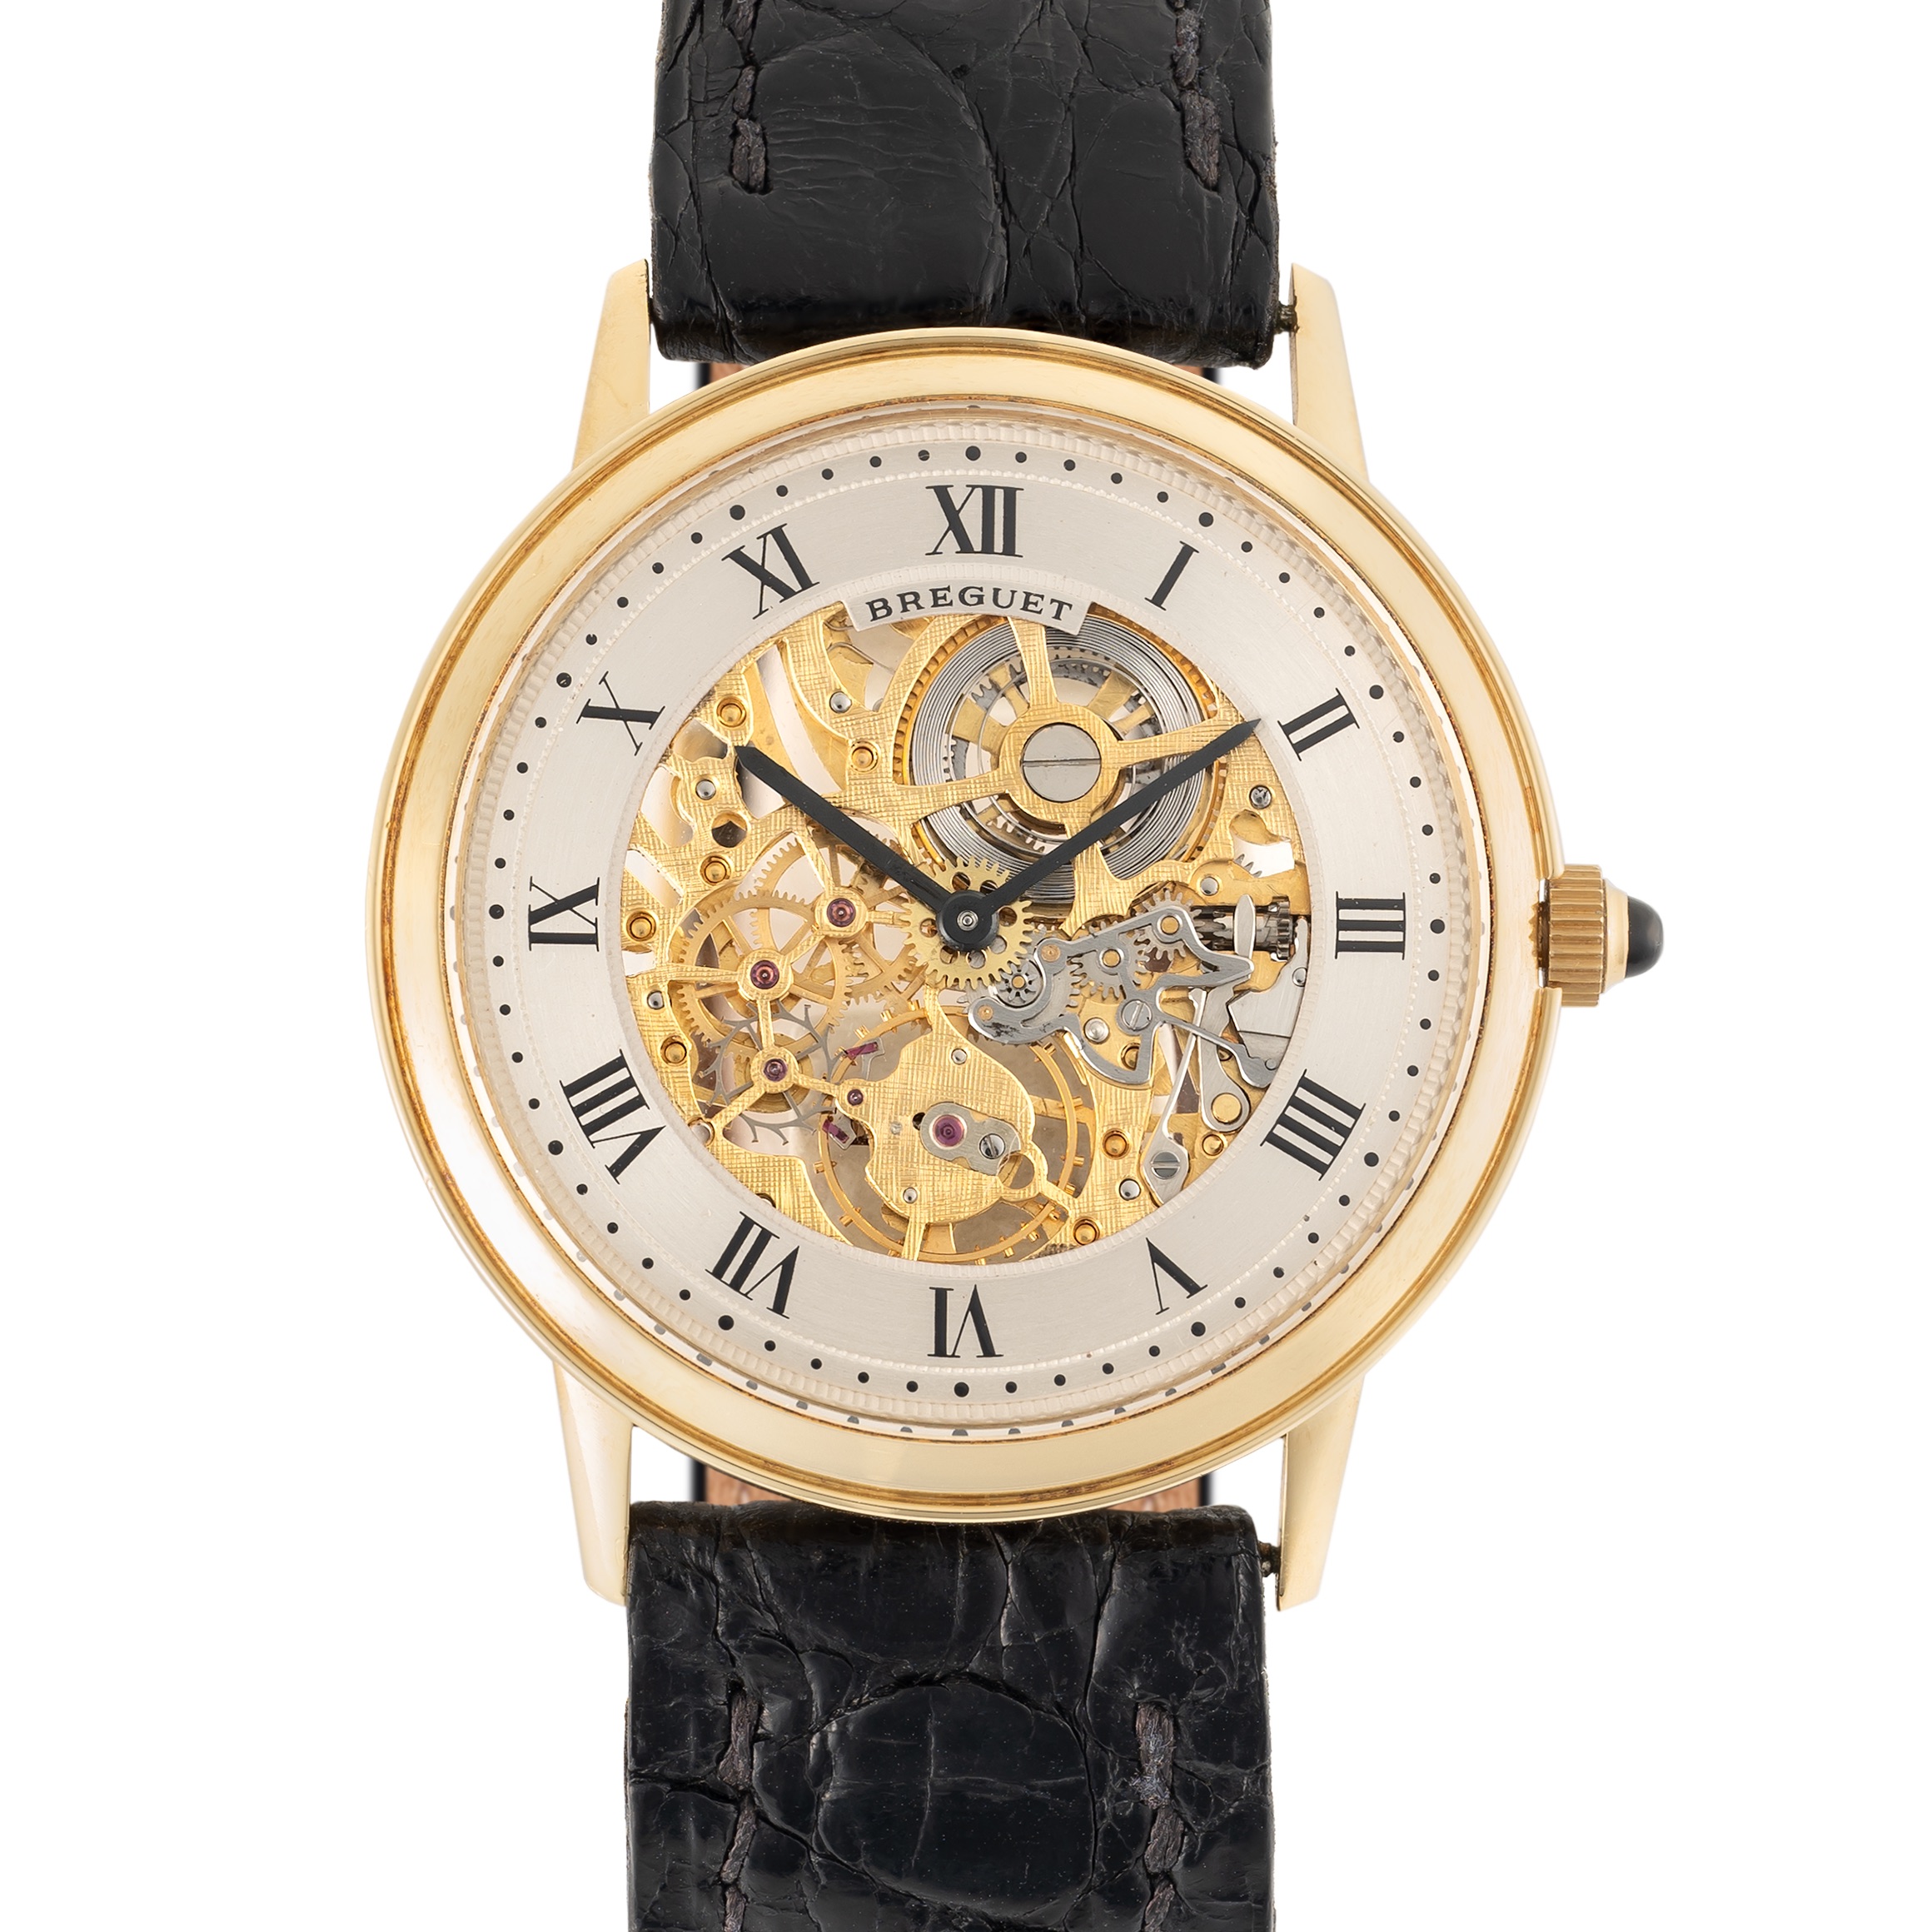 A VERY RARE GENTLEMAN'S SIZE 18K SOLID GOLD BREGUET CLASSIQUE EXTRA PLAT SKELETONISED WRIST WATCH - Image 9 of 9